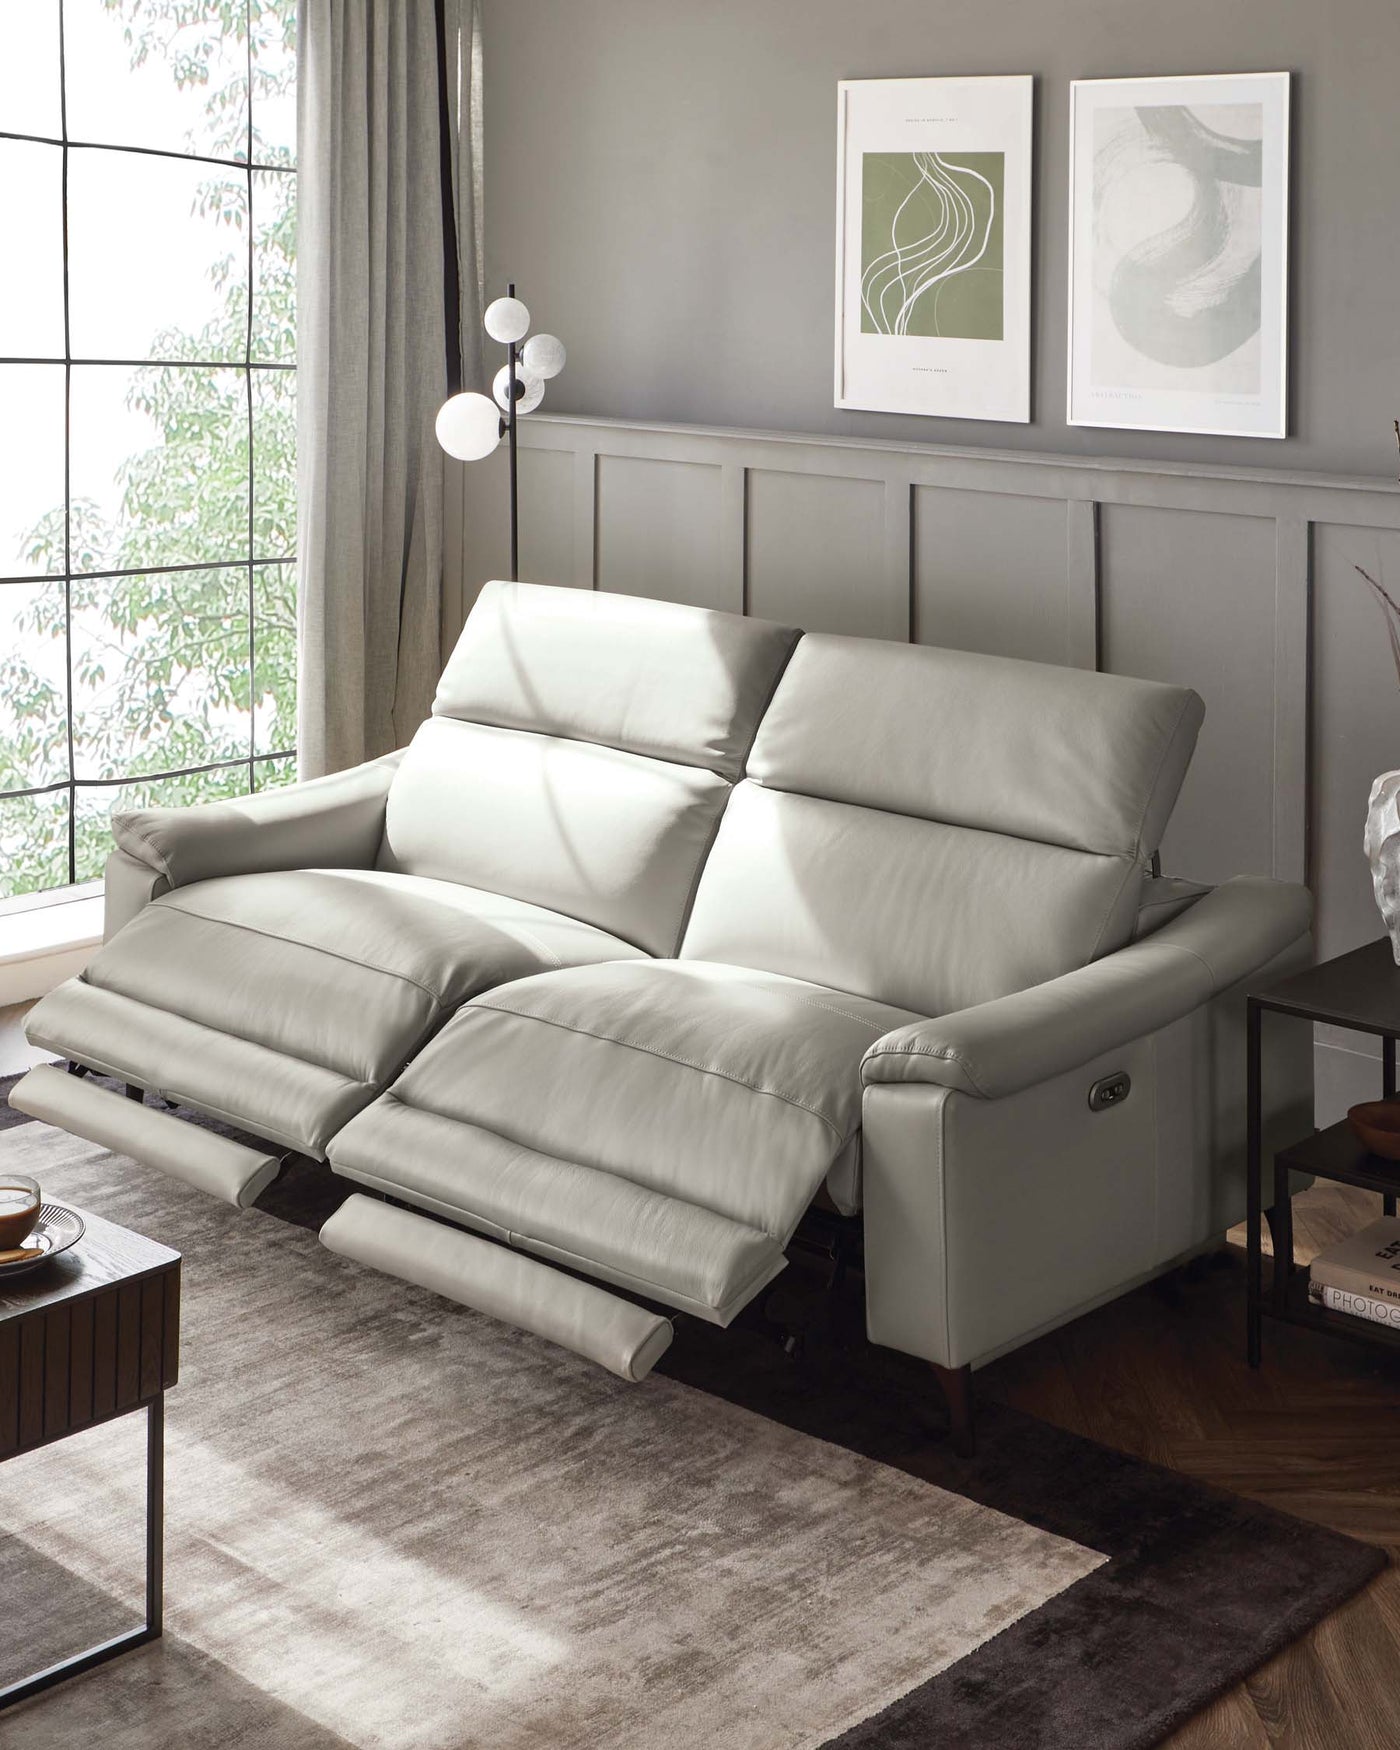 A modern light grey leather reclining sofa with padded armrests and headrest, set in a contemporary living room with a rectangular wooden side table, grey-toned area rug, and white spherical floor lamp. Two framed abstract wall art pieces hang above in a calm, neutral-toned space.